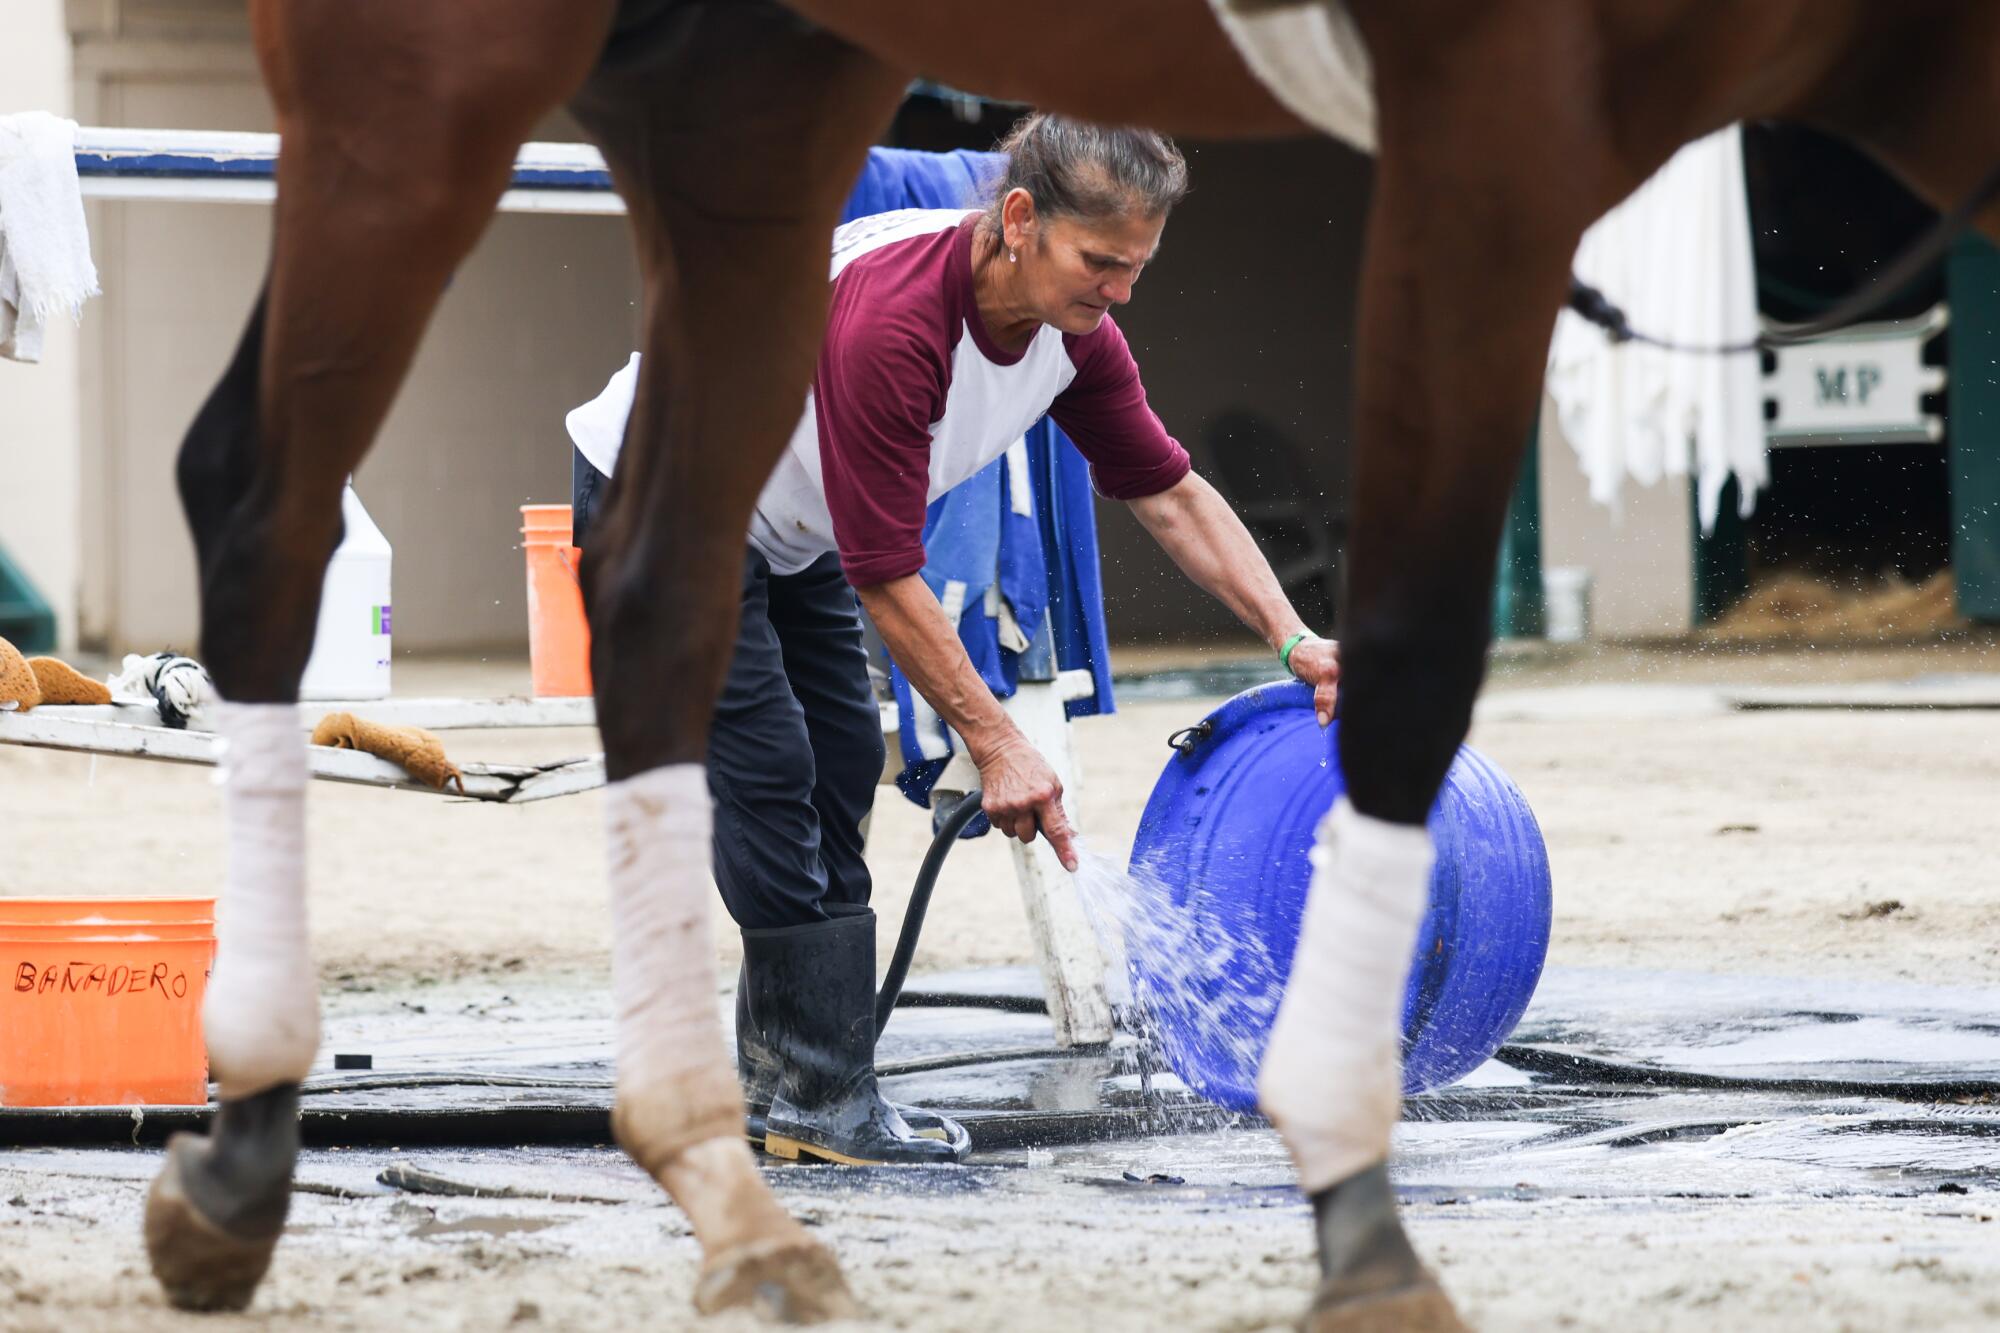 Maria Perez washes out buckets used to bathe the horses on the backstretch of Del Mar Racetrack.